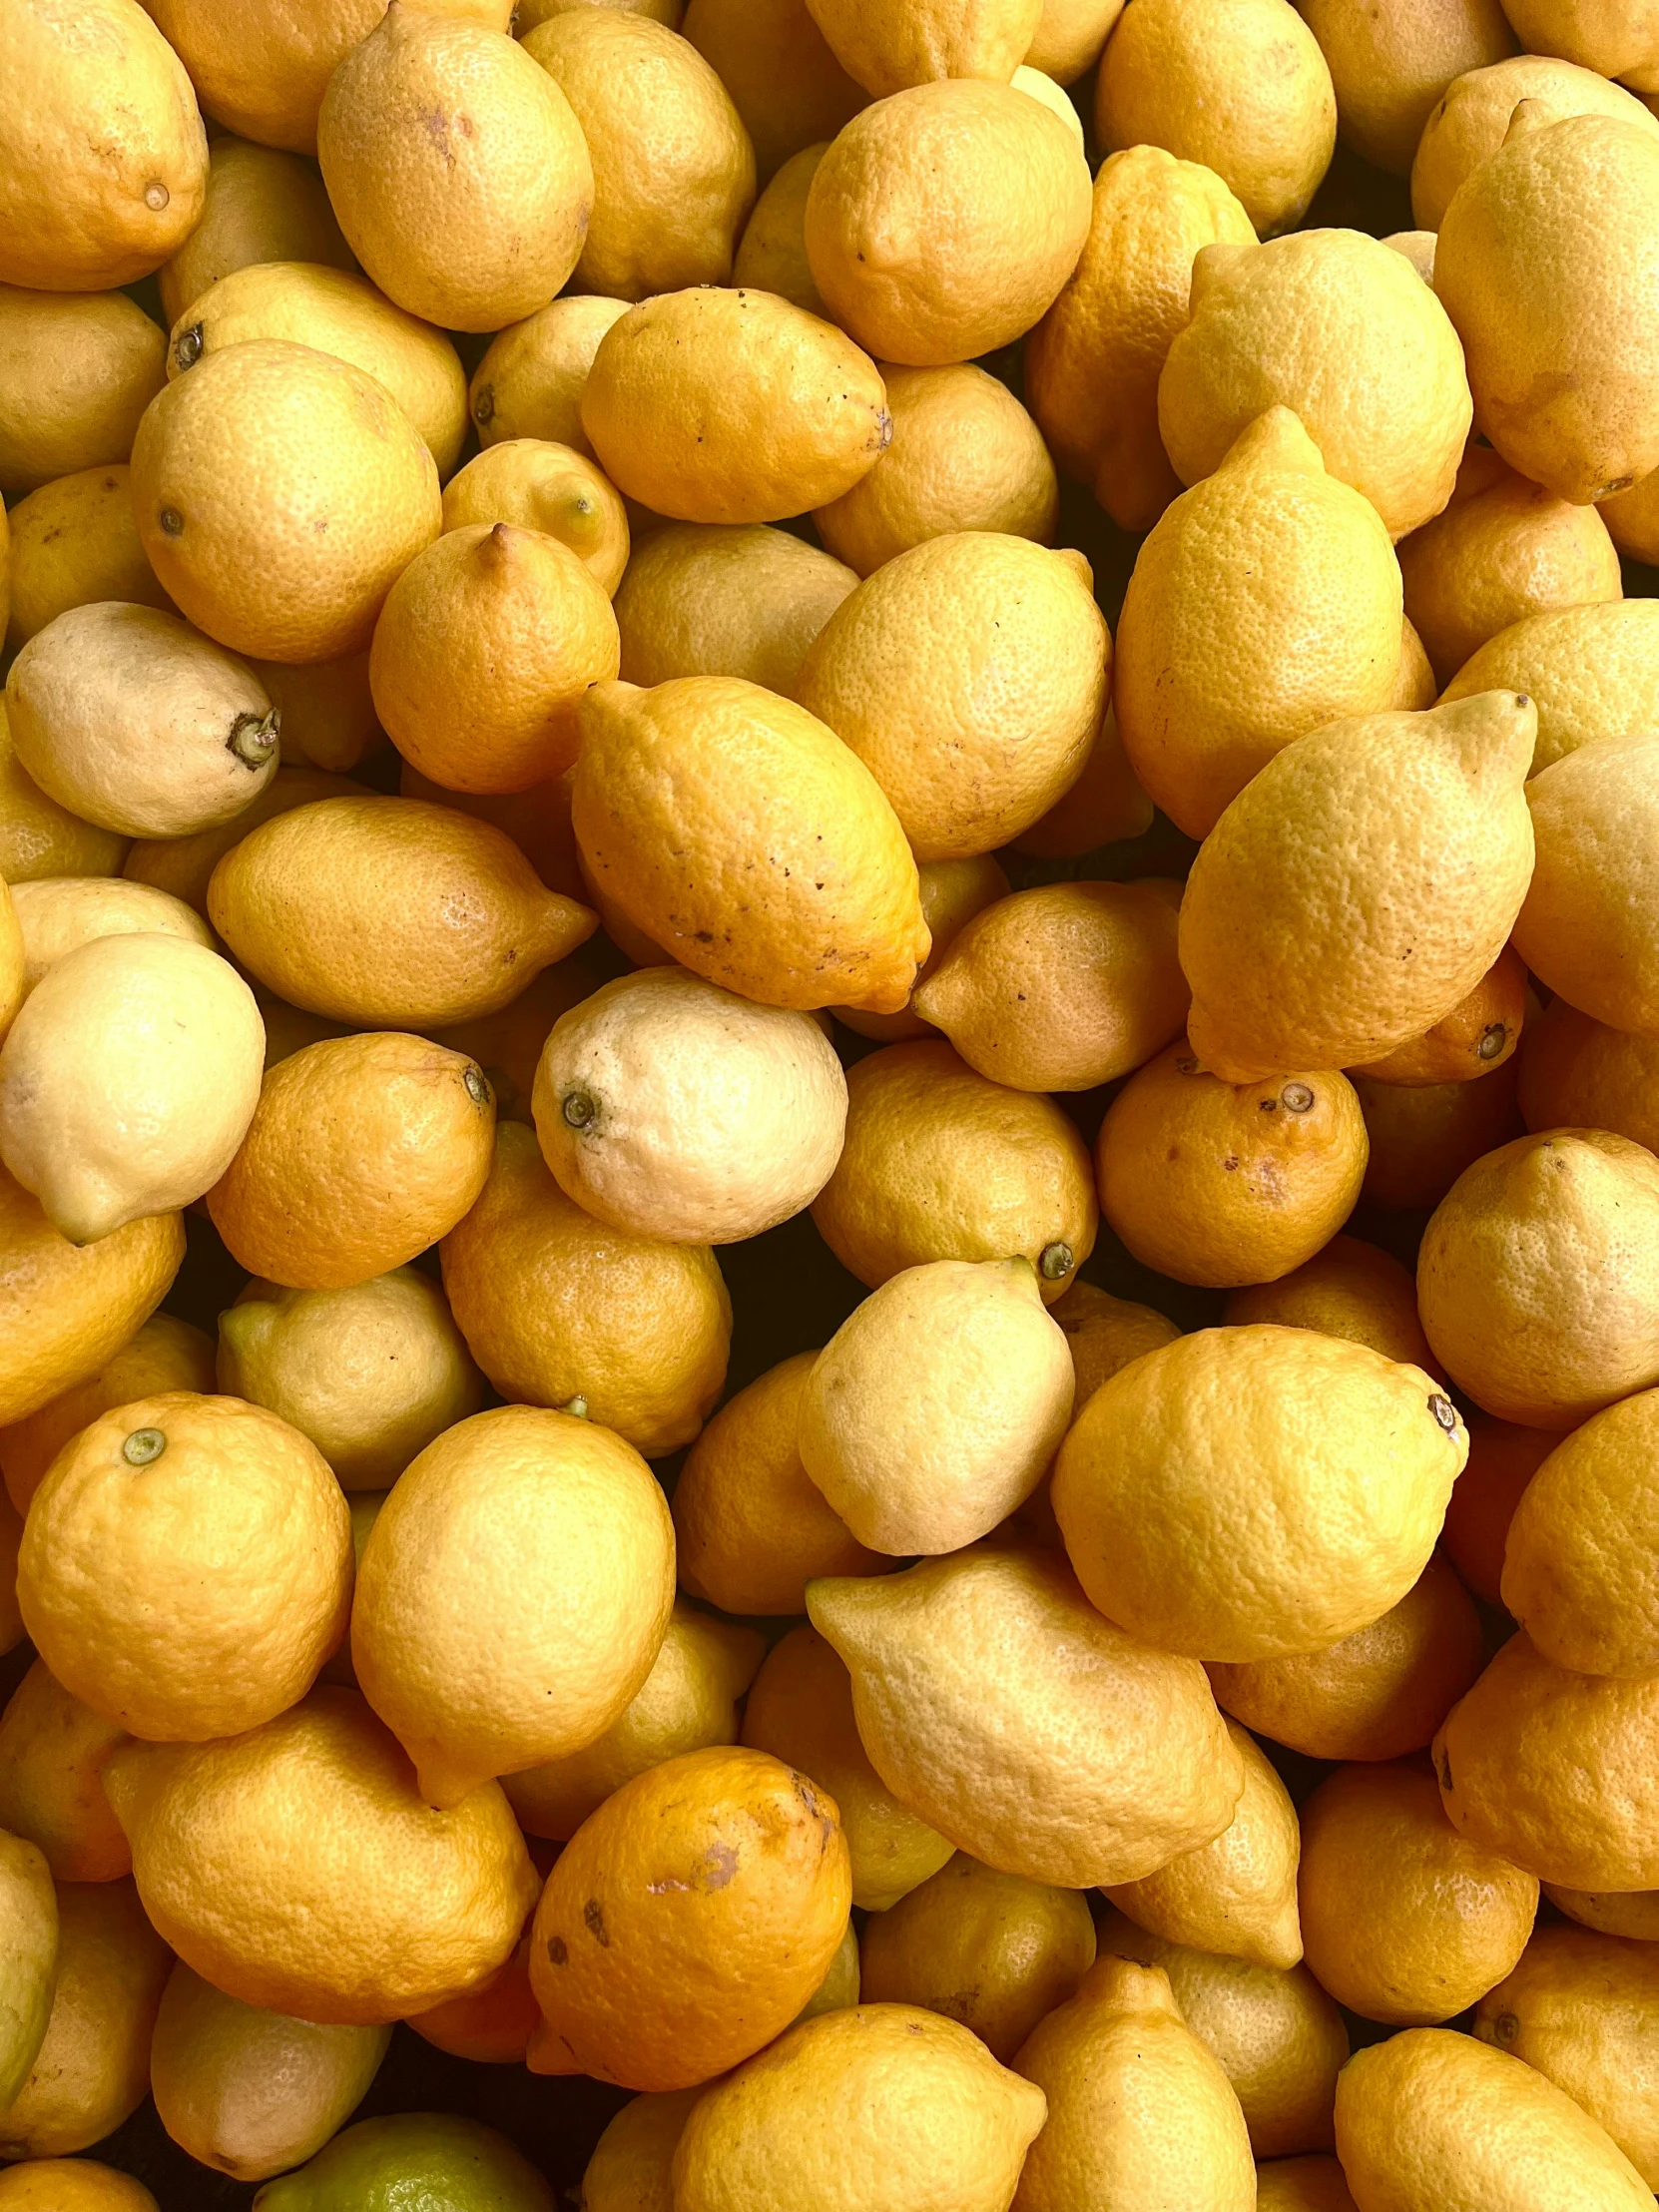 a large pile of lemons, limes and other fruits